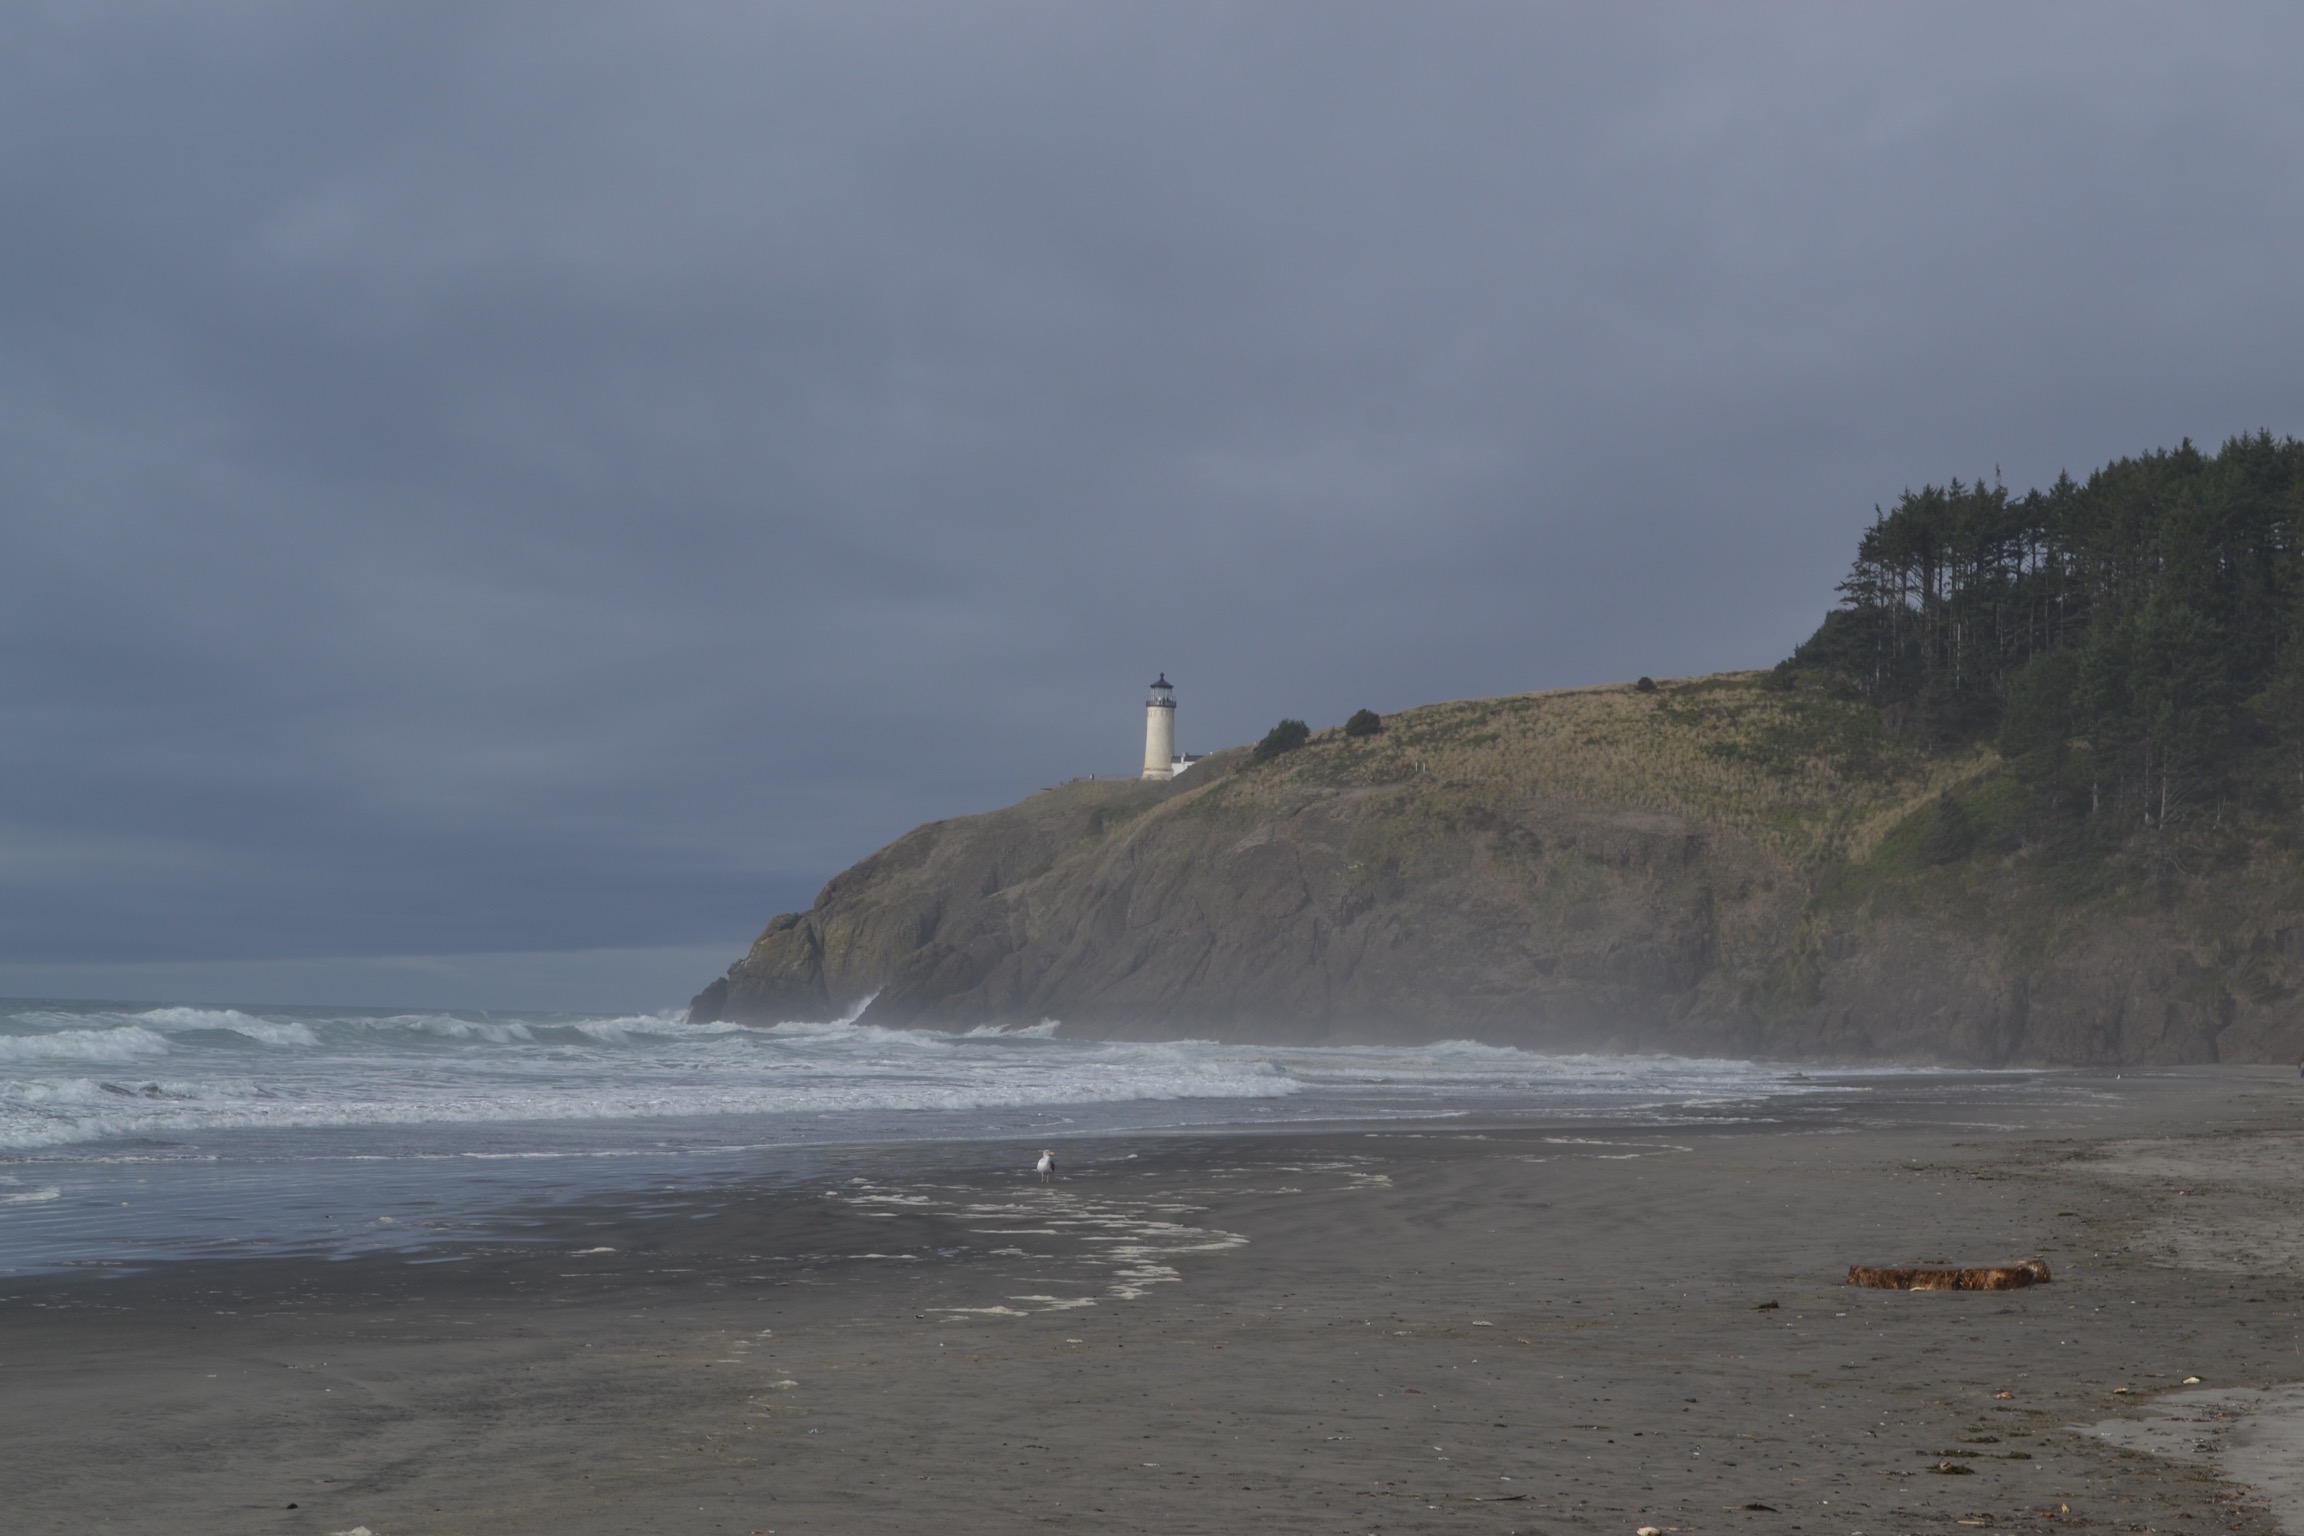 A beach with rough waves and cliffs with a plain white lighthouse before a gray sky.